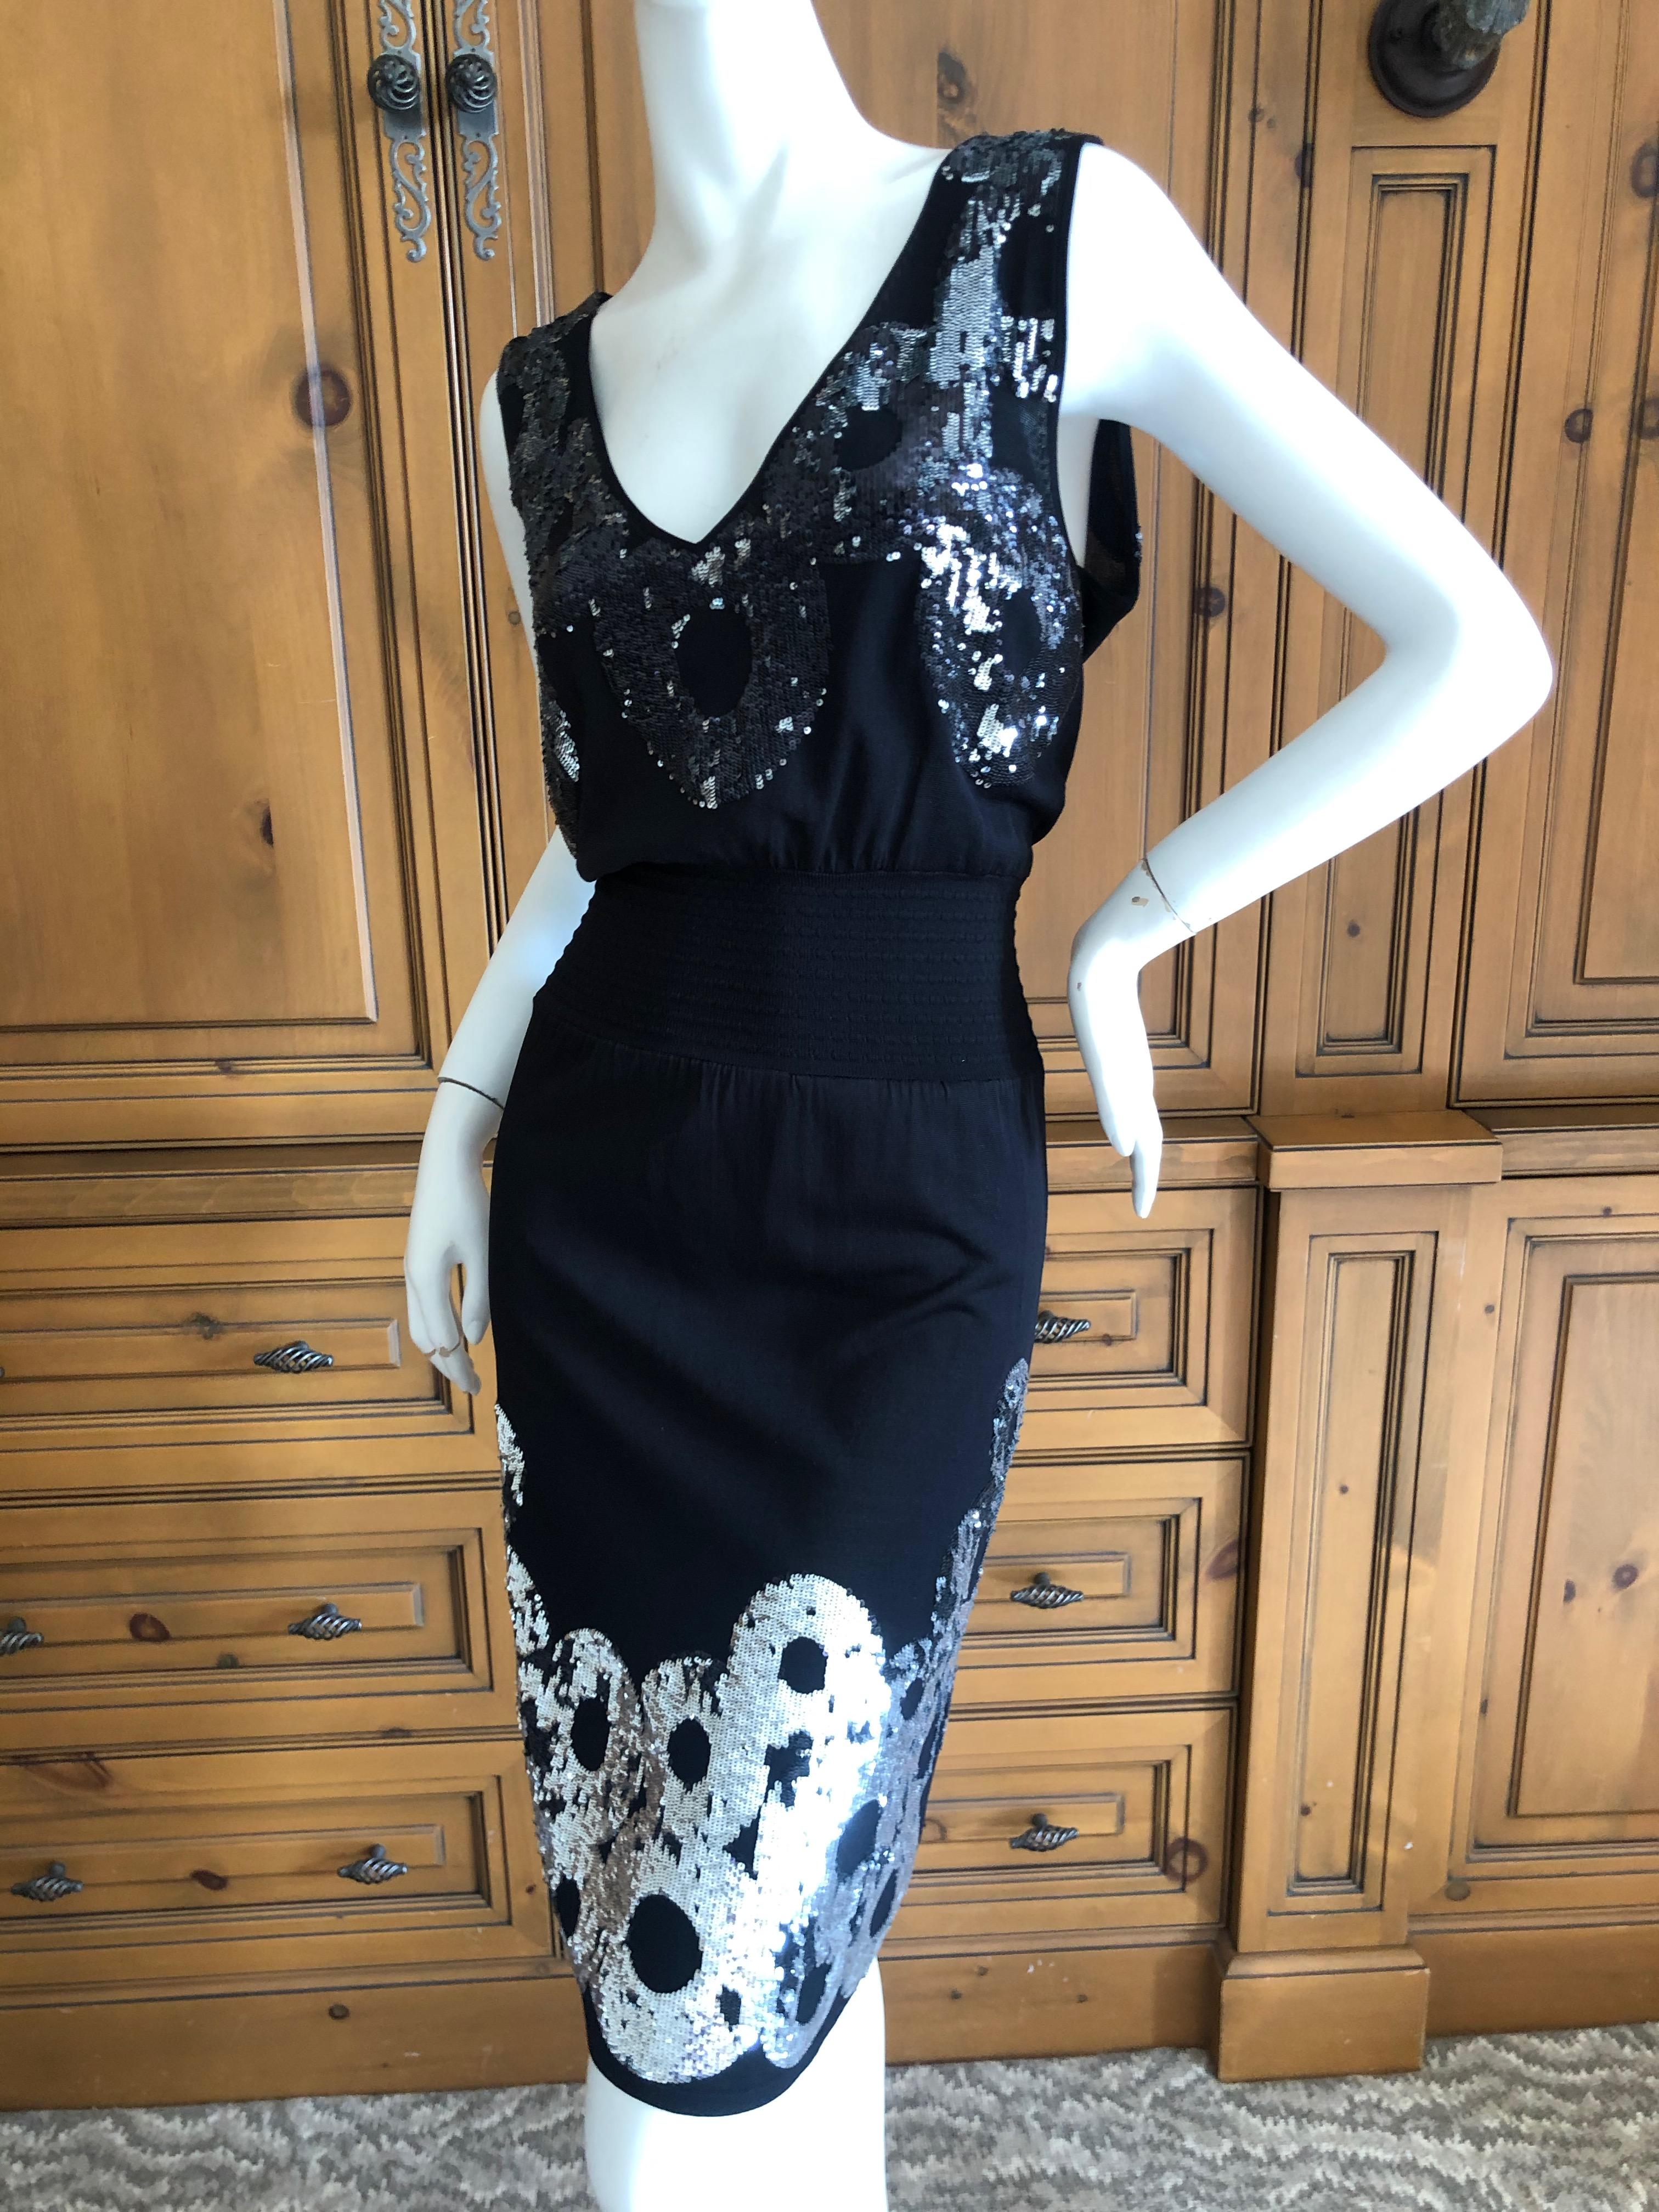  Roberto Cavalli Class Cavalli Sequin Little Black Knit Cocktail Dress.
There is a lot of stretch .
Size 42
 Bust 36